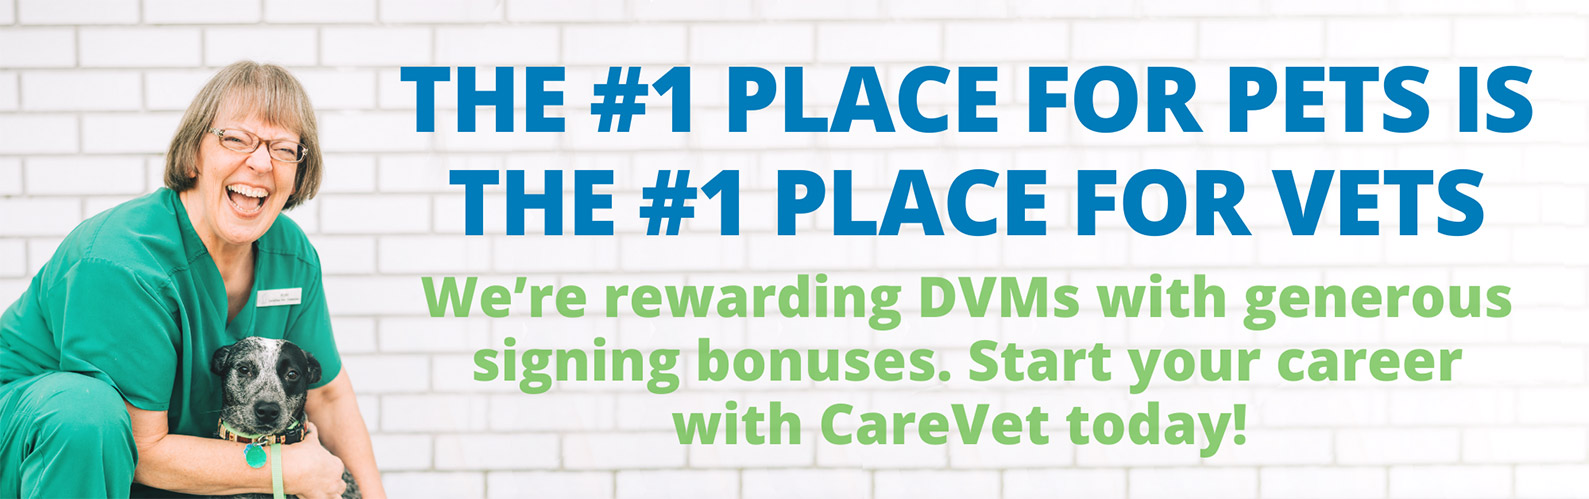 The #1 place for pets is the #1 place for vets. We're rewarding DVMs with generous signing bonuses. Start your career with CareVet today!